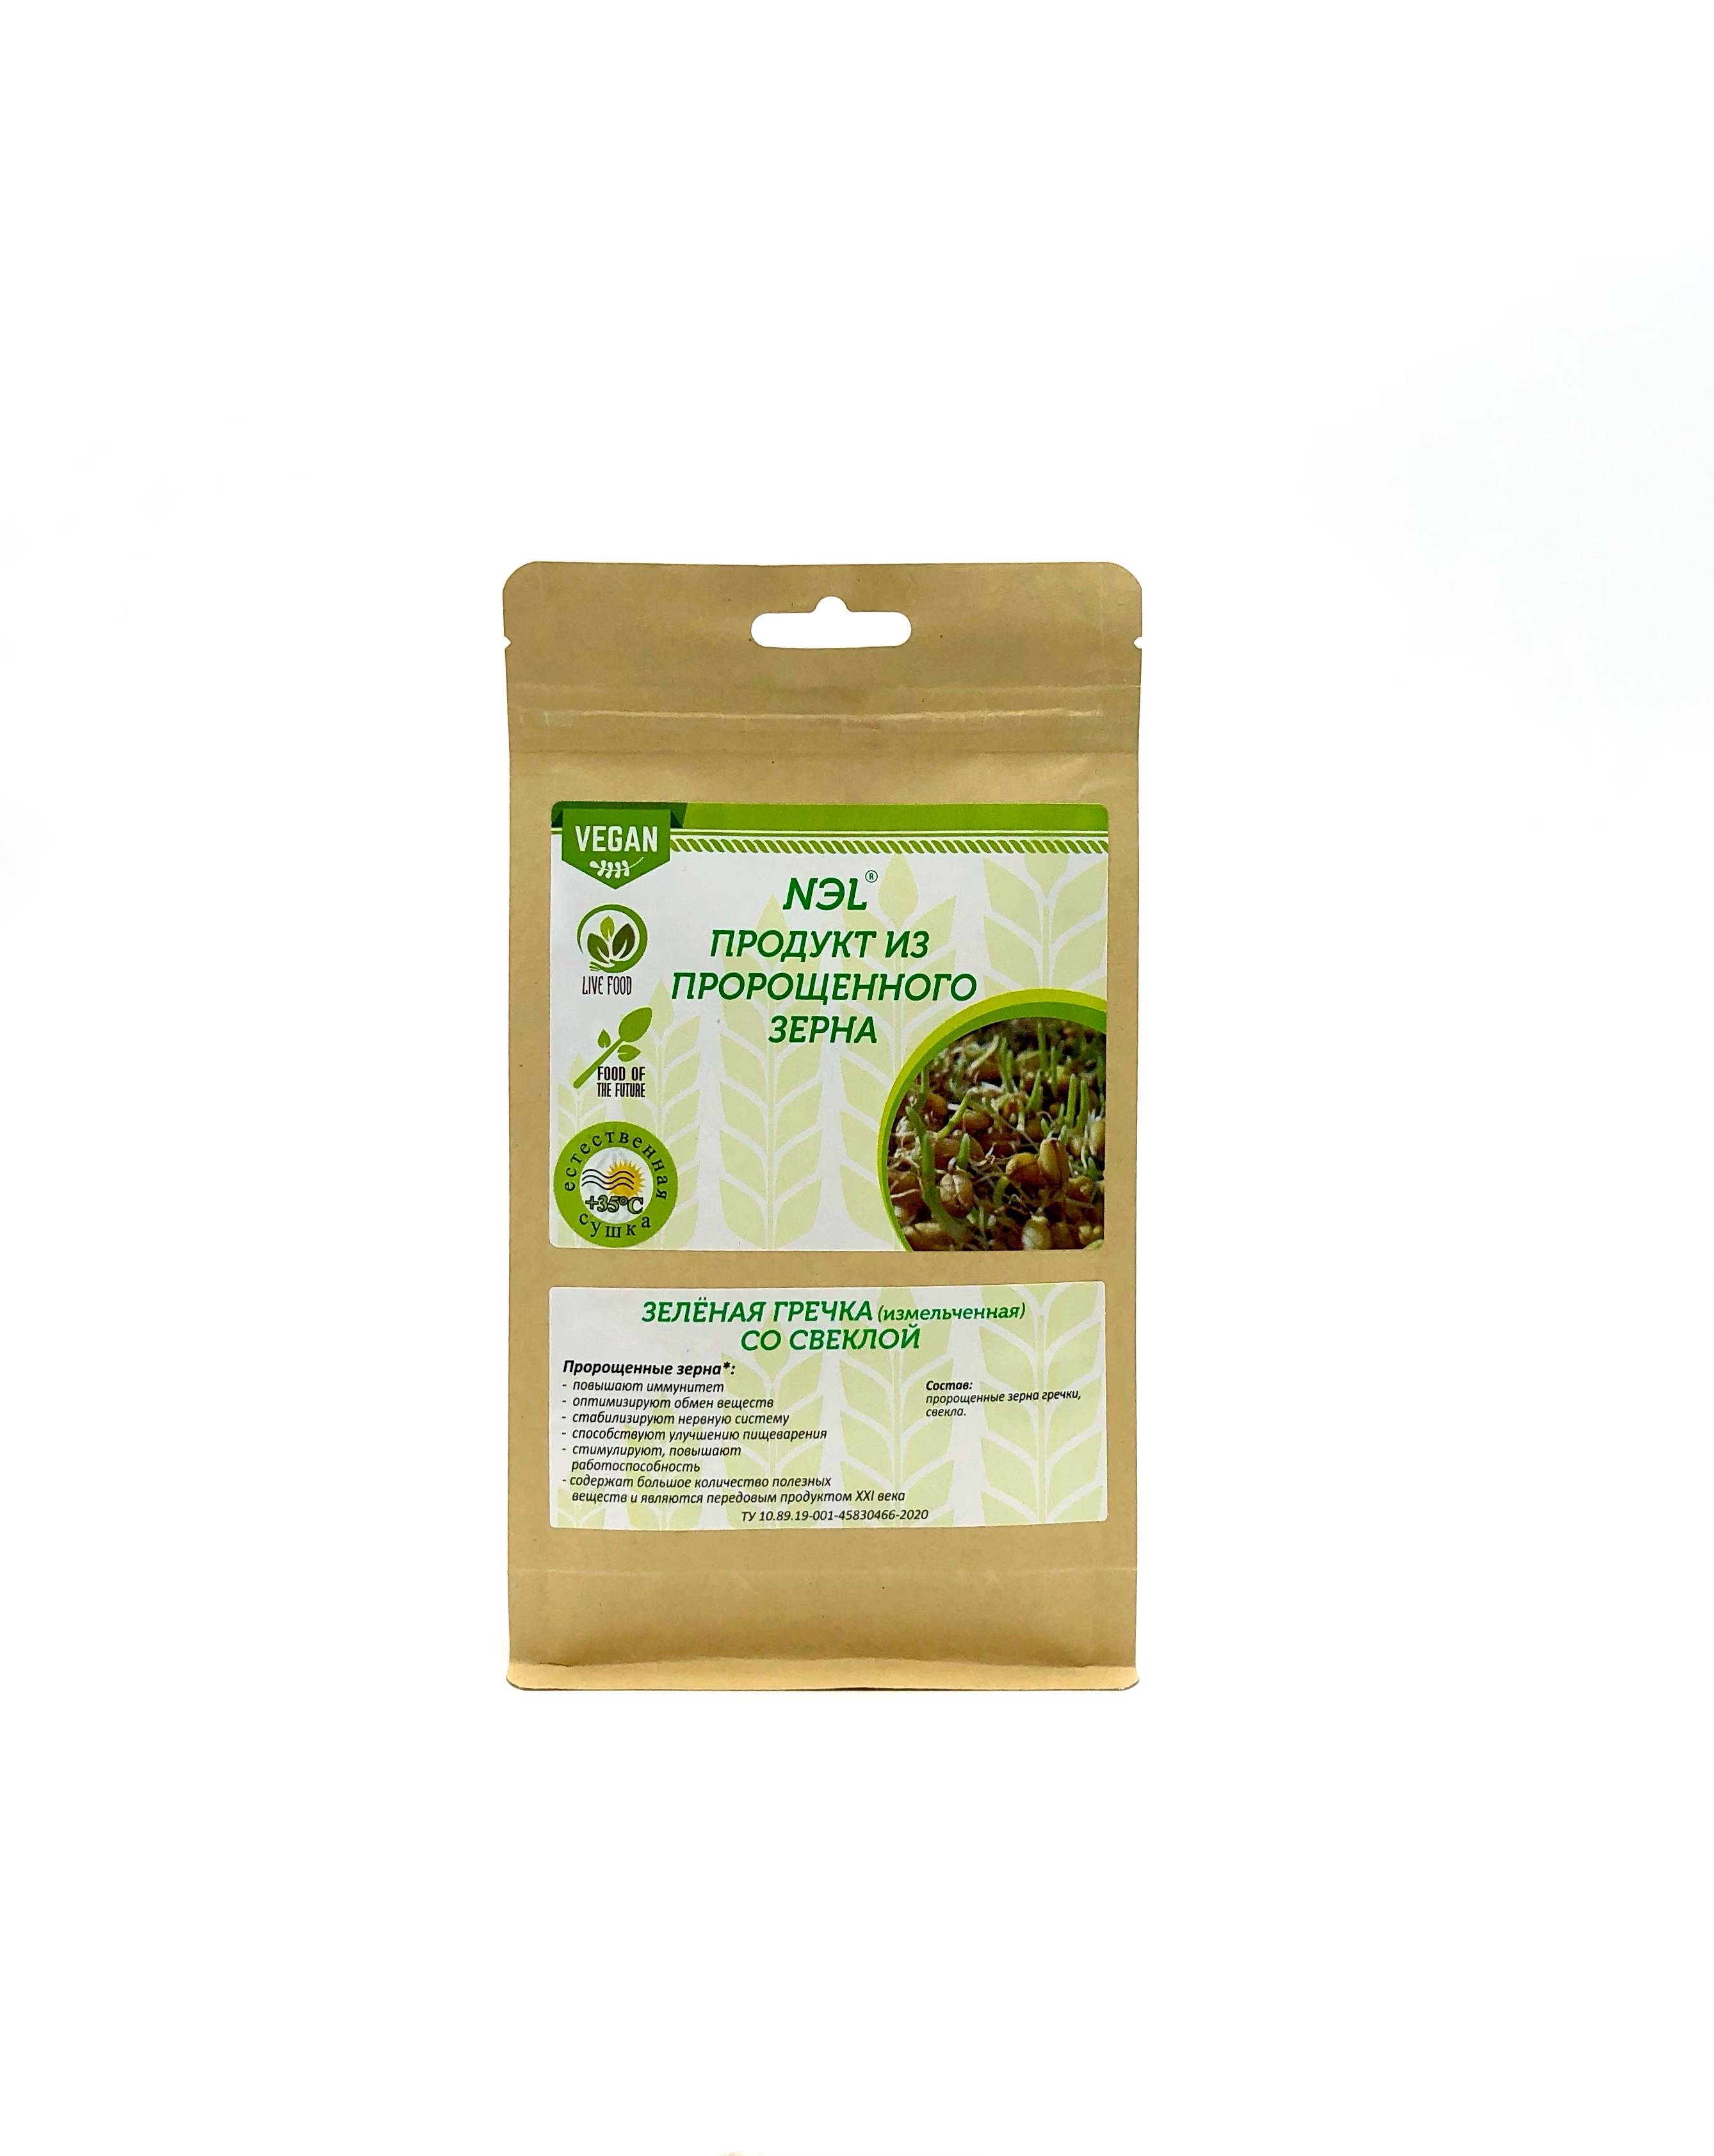 Sprouted buckwheat product with beets 0,25 g - ООО "НЭЛЬ"/Limited Liability Company "NЭL" - Vegetarian food buy wholesale from manufacturer and supplier on UDM.MARKET